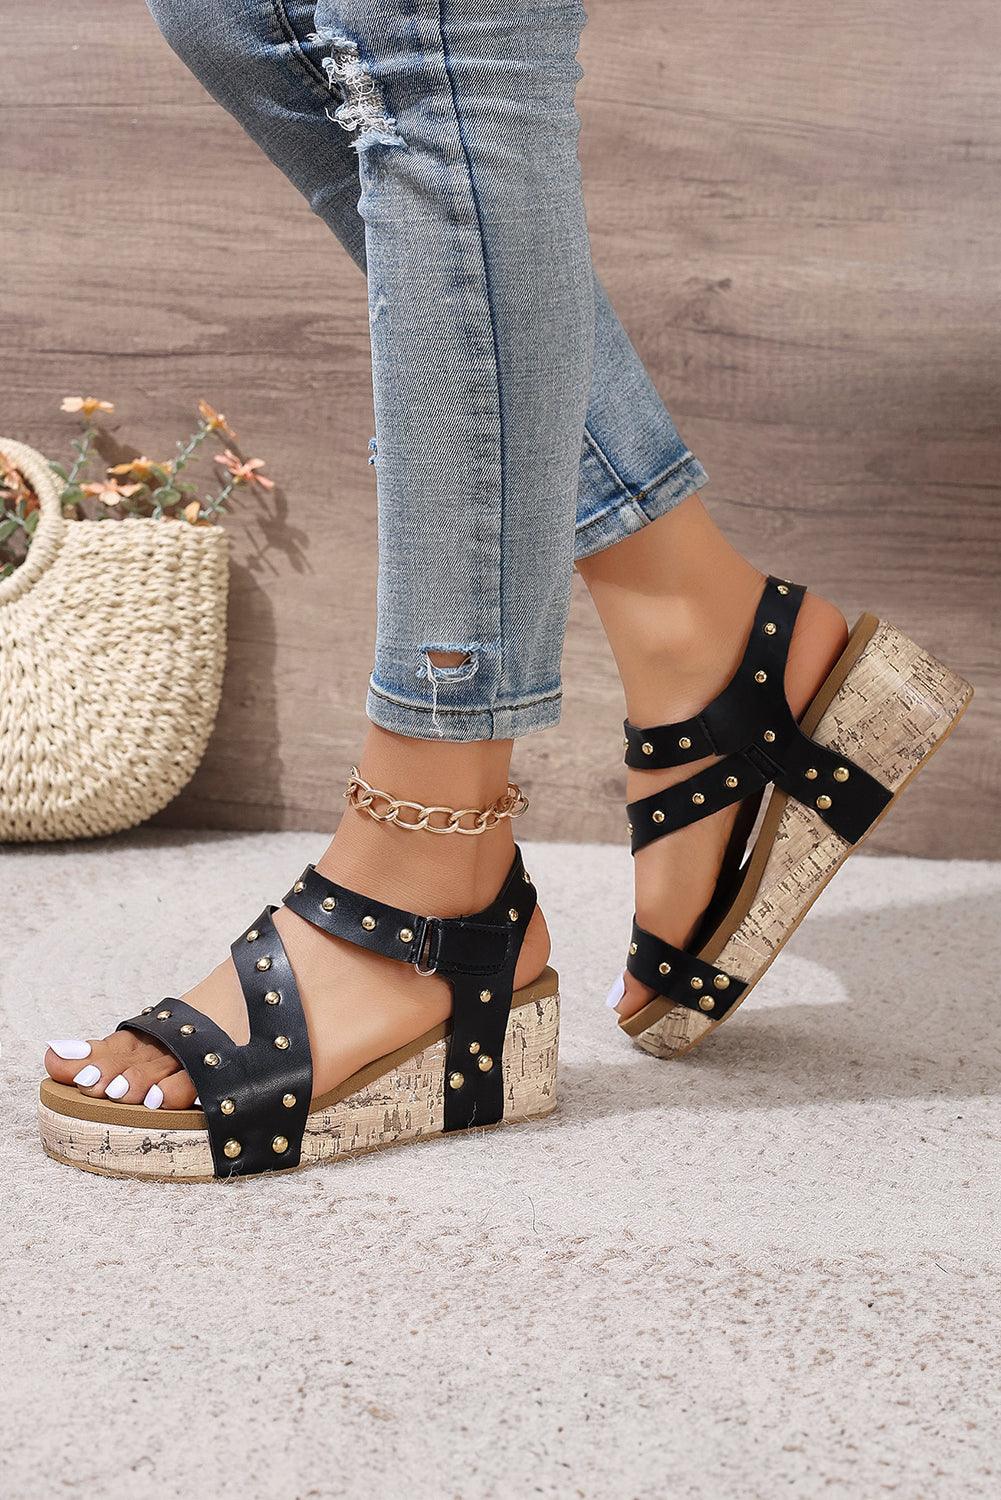 Black Rivet Hollow Out Leather Wedge Sandals - L & M Kee, LLC